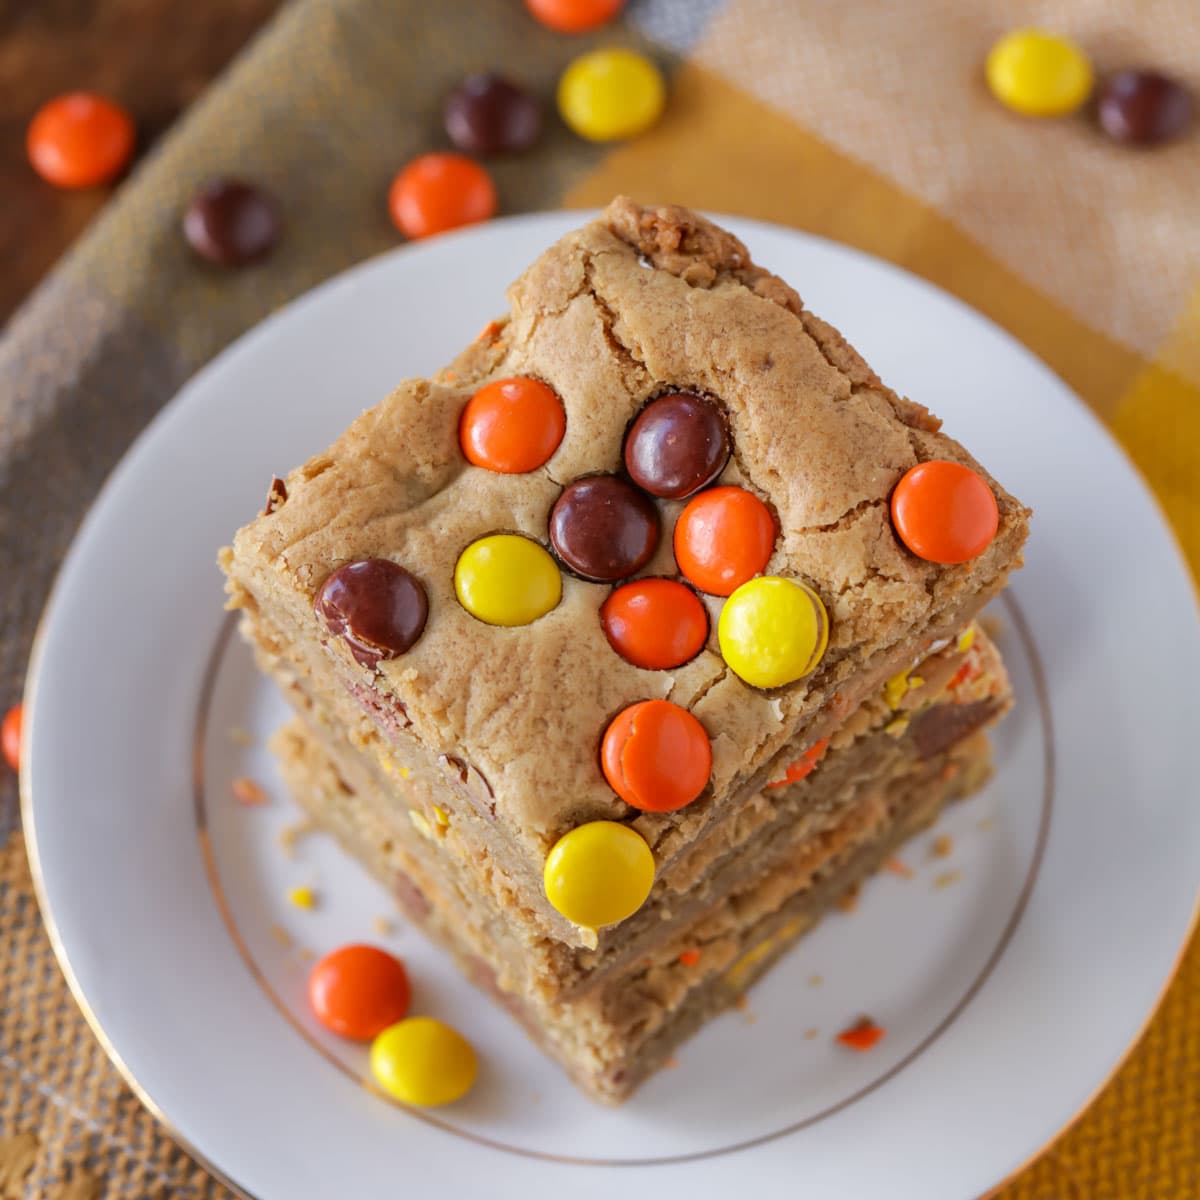 Cookie bar recipes - reeses pieces bars stacked on a white plate.